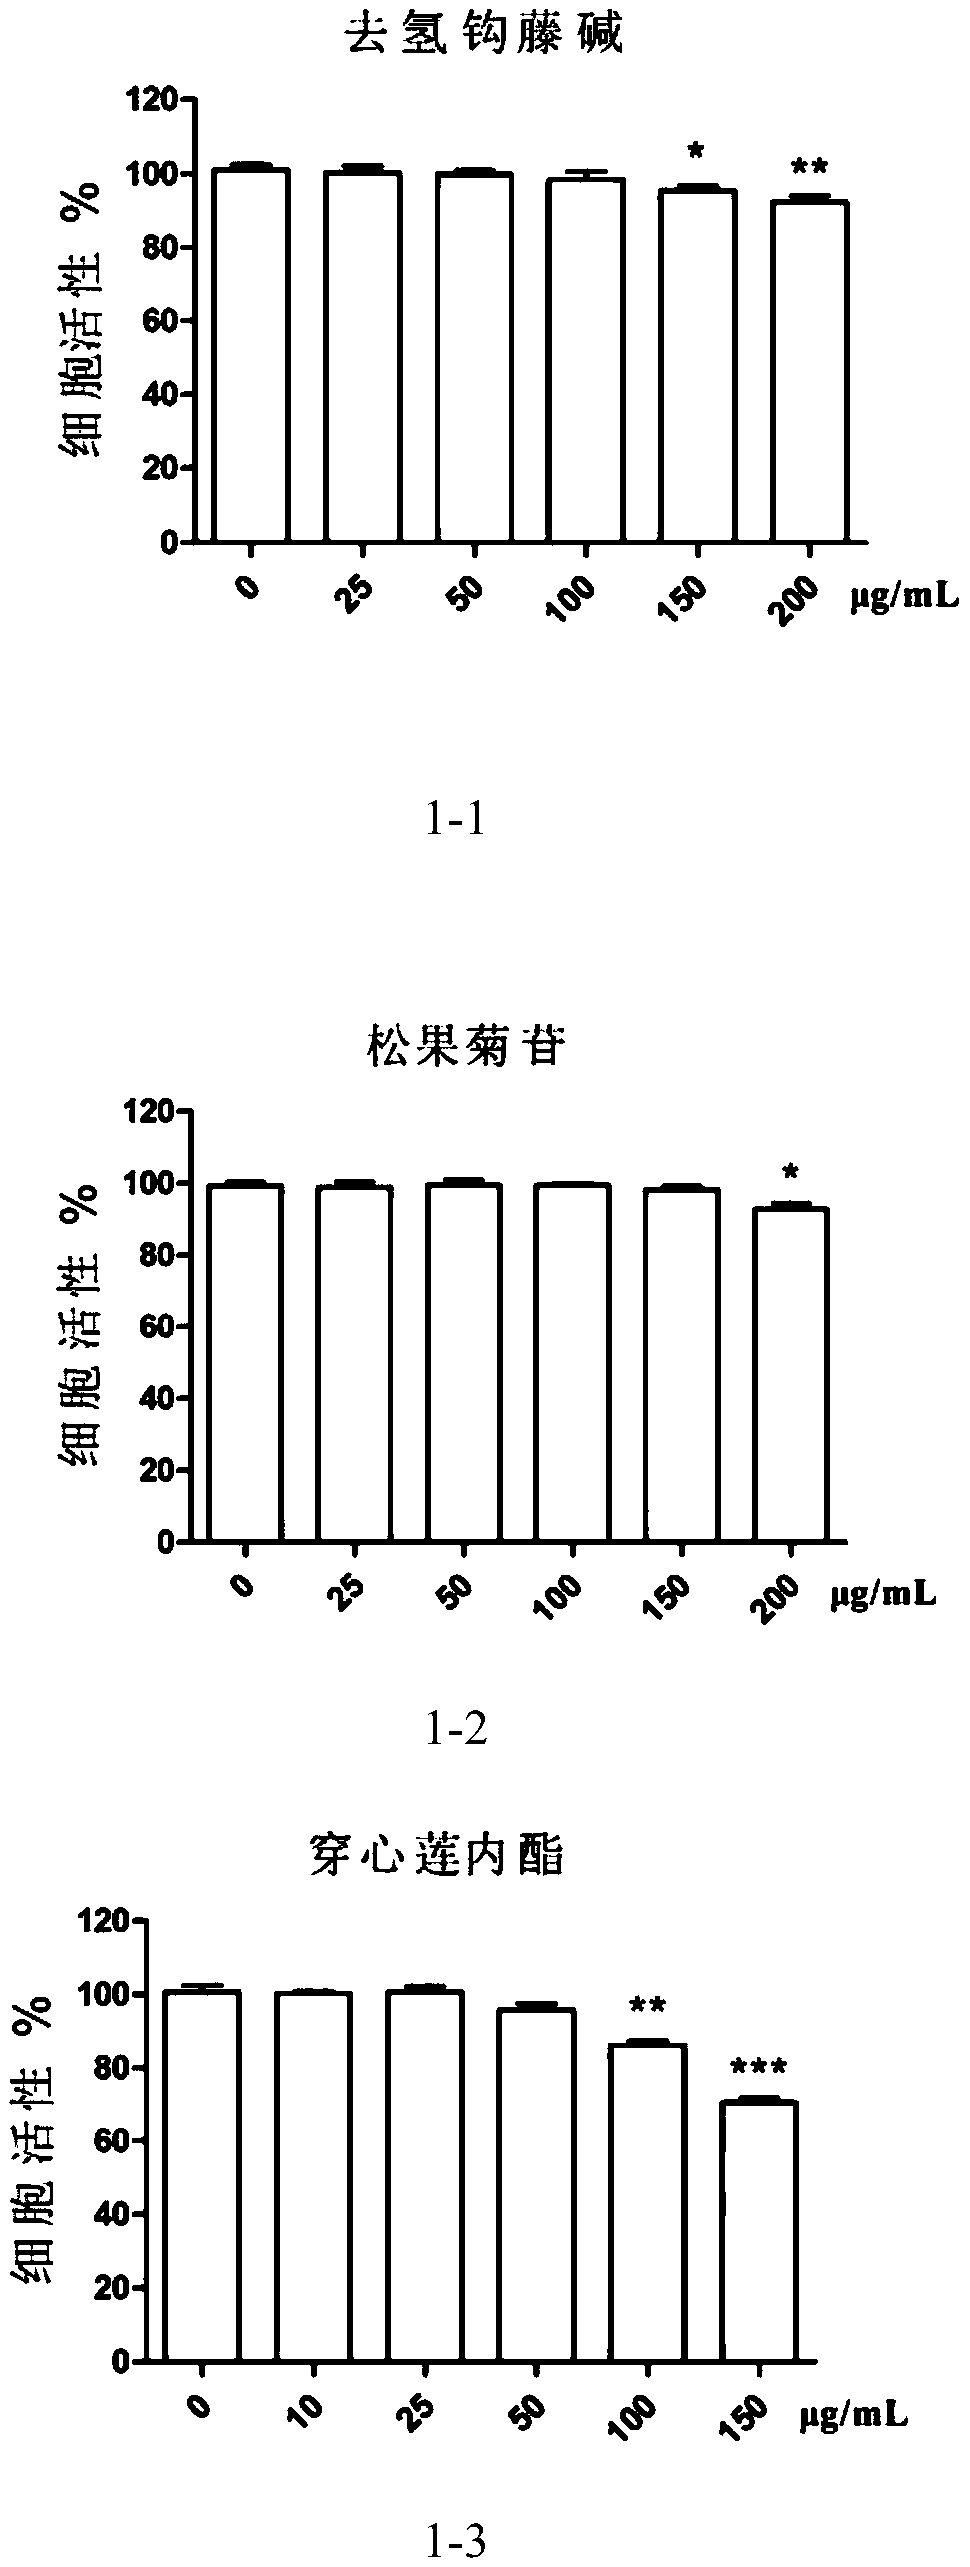 Composition containing corynoxeine and skin care application of composition